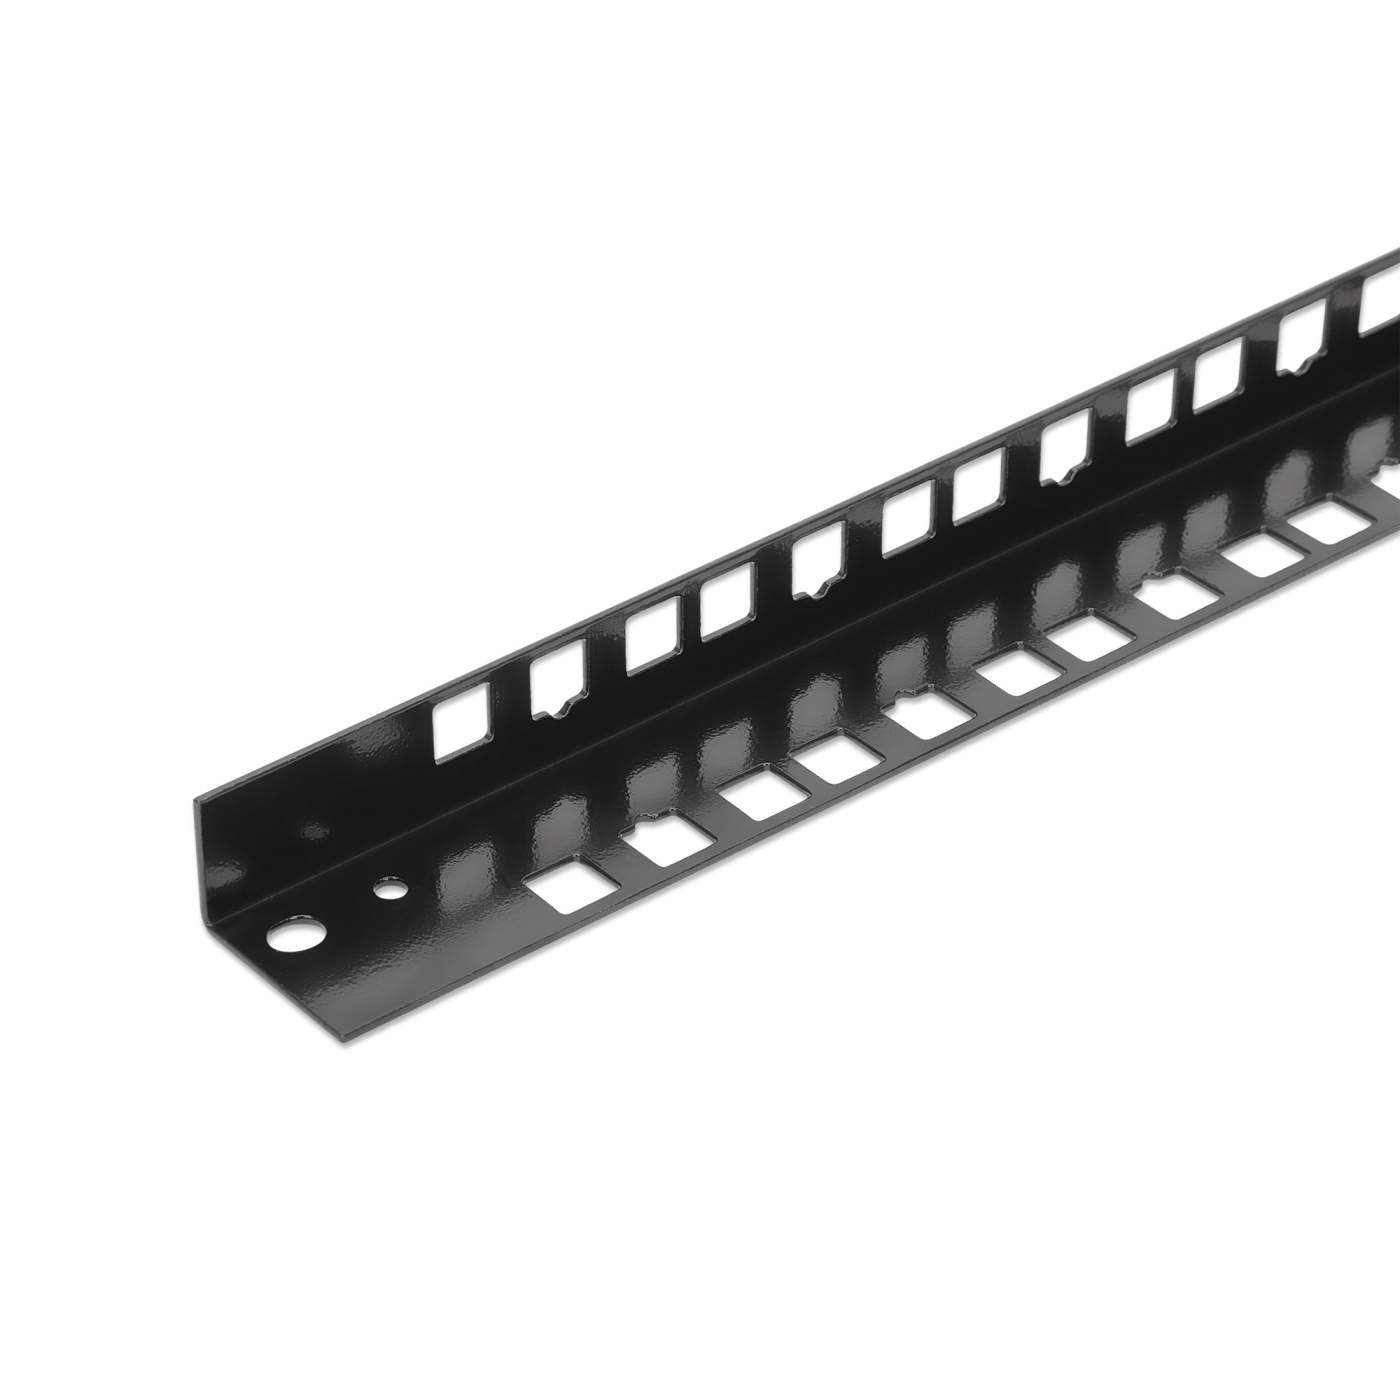 Spare Rails for 19" Wallmount Cabinets, 15U Image 4